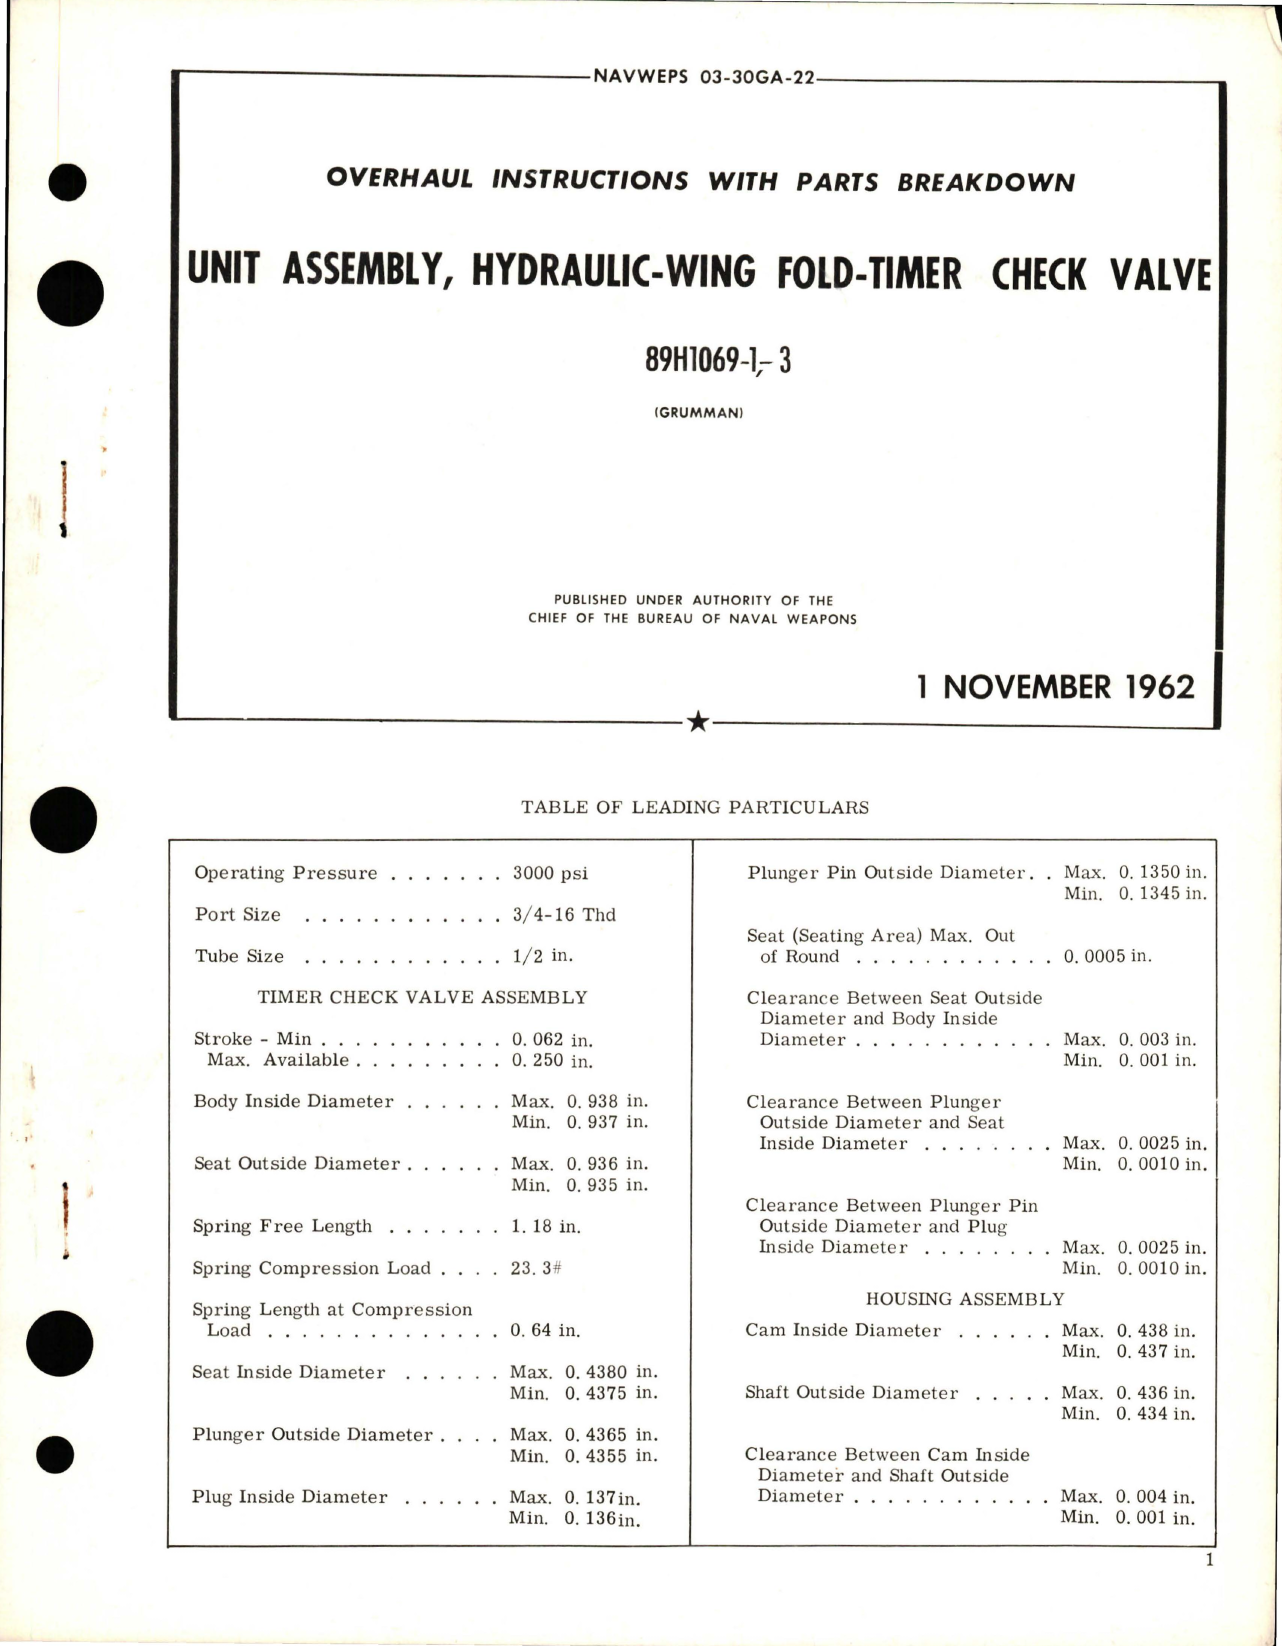 Sample page 1 from AirCorps Library document: Overhaul Instructions with Parts Breakdown for Hydraulic Wing Fold Timer Check Valve Unit Assembly - 89H1069-1 and 89H1069-3 